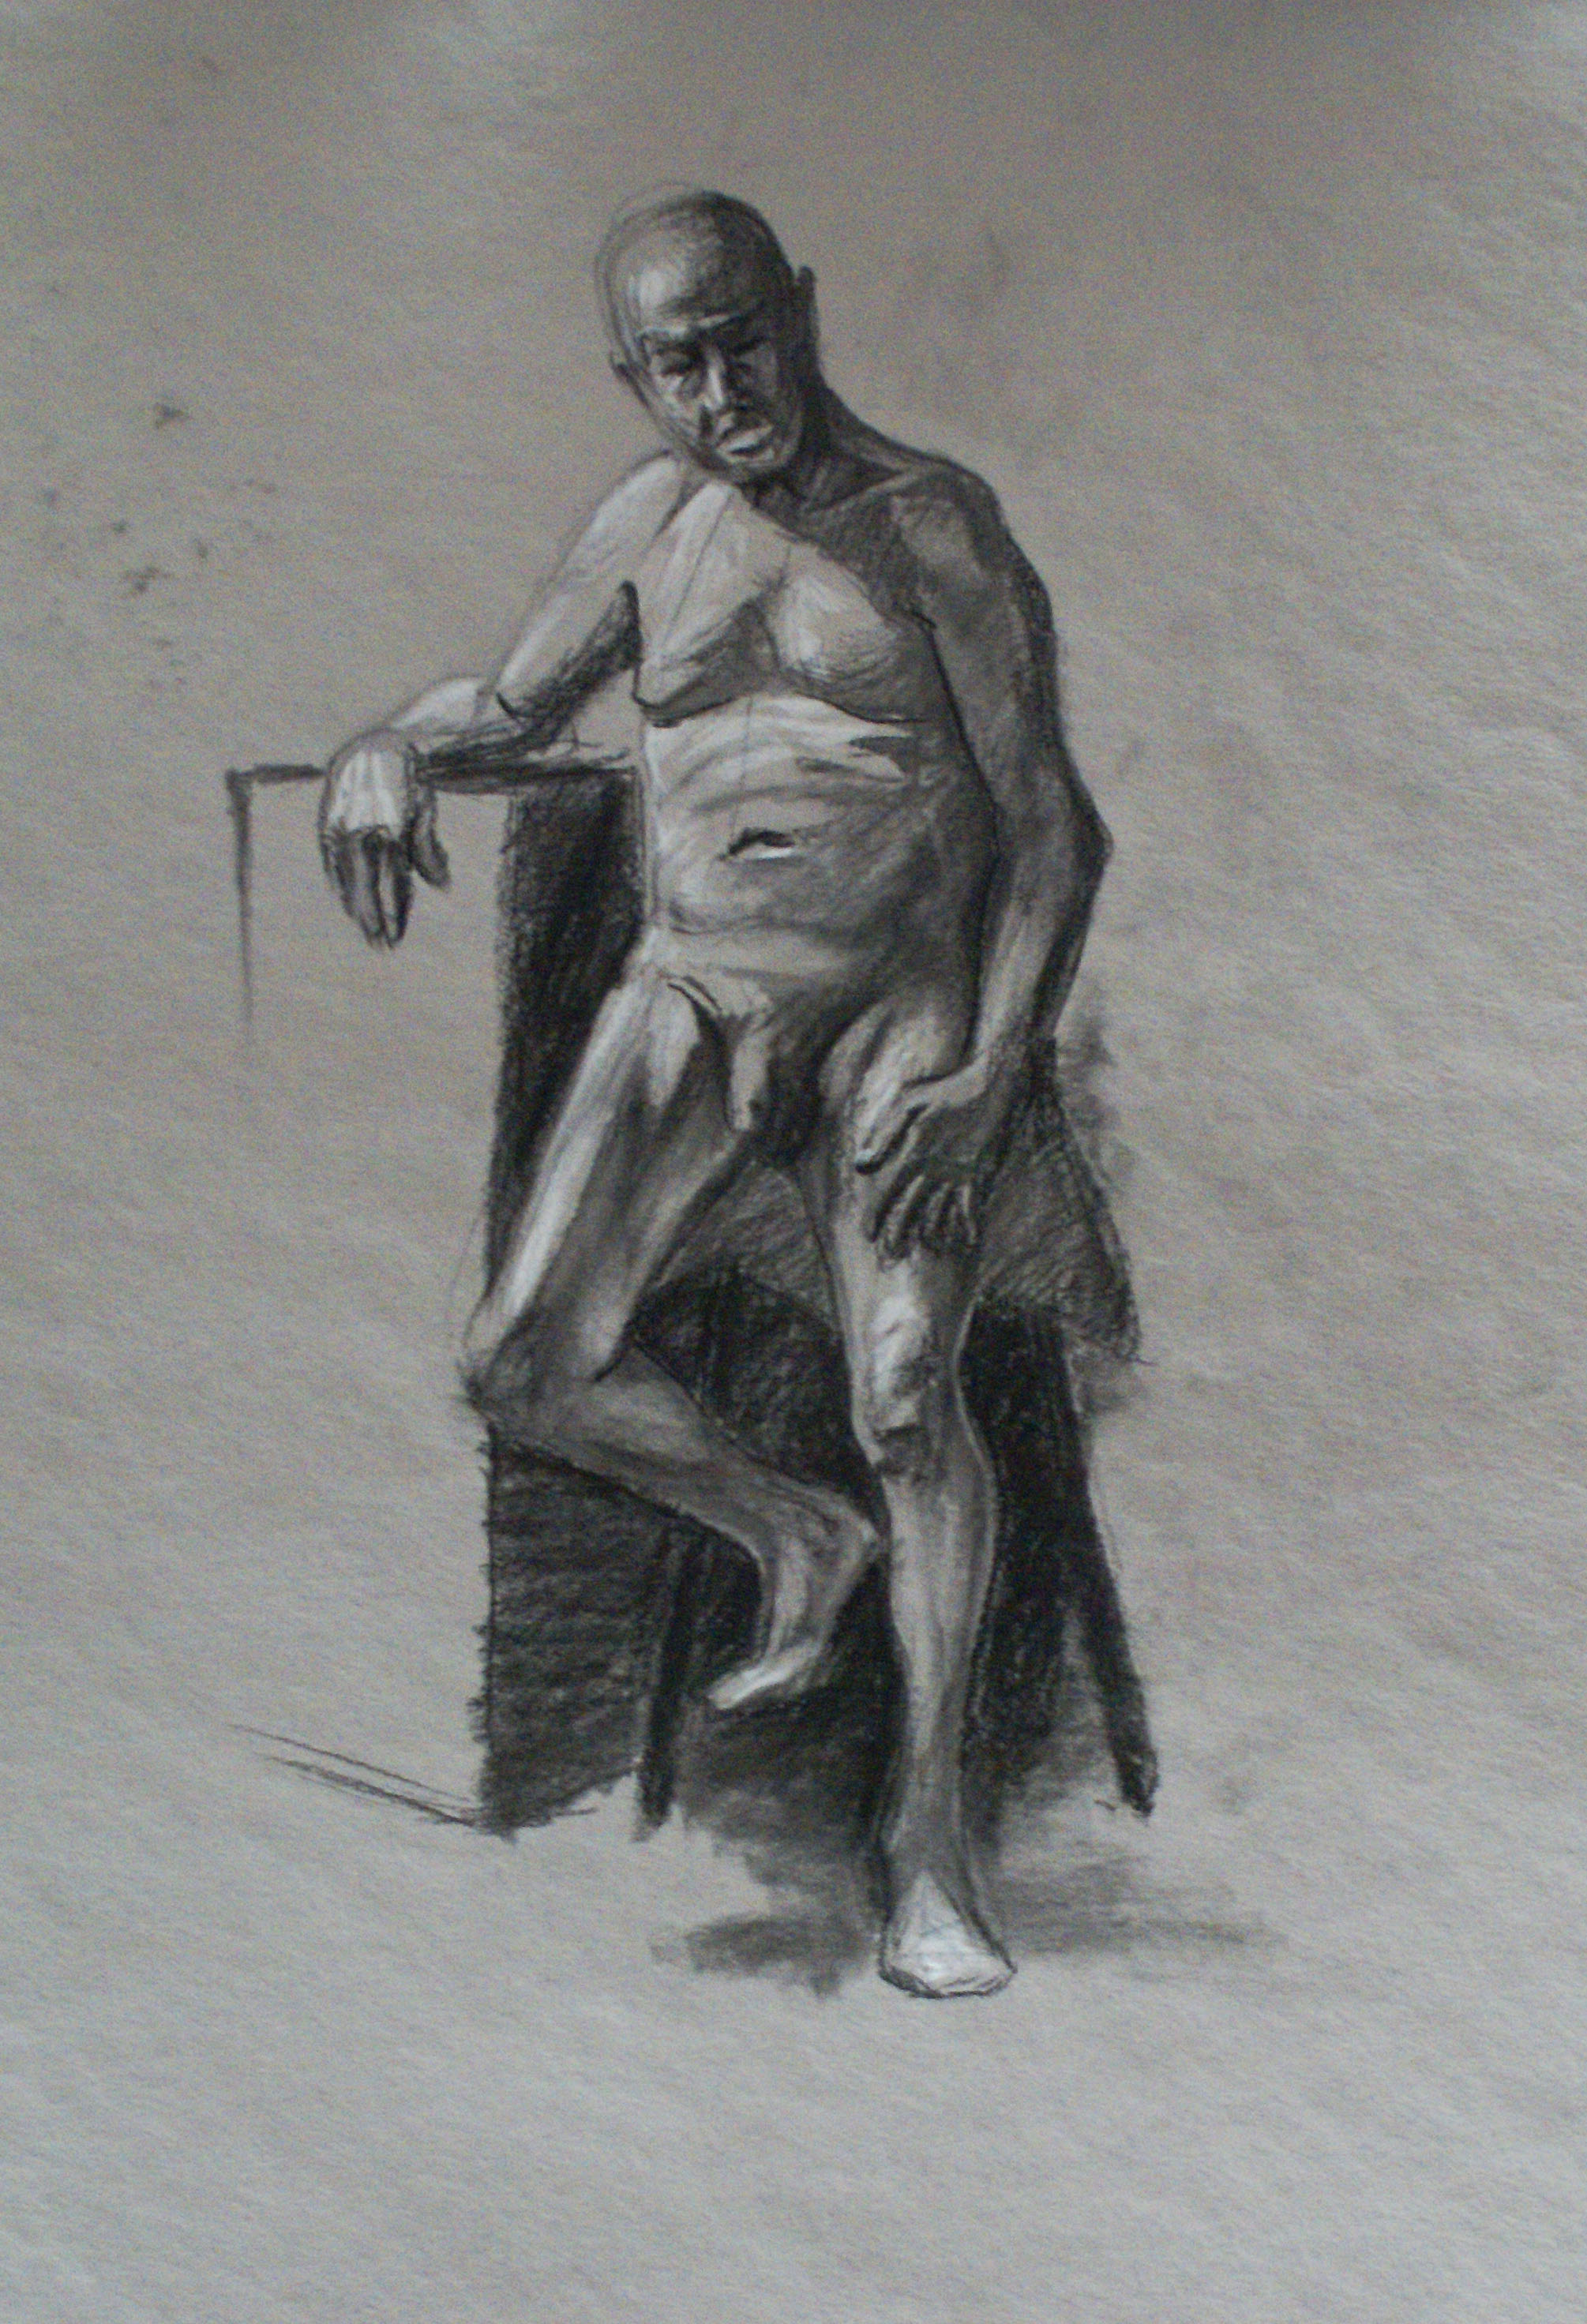 Orlando Rodriguez. Anatomy and Figure Drawing II. Charcoal on paper 18 x 24 in.